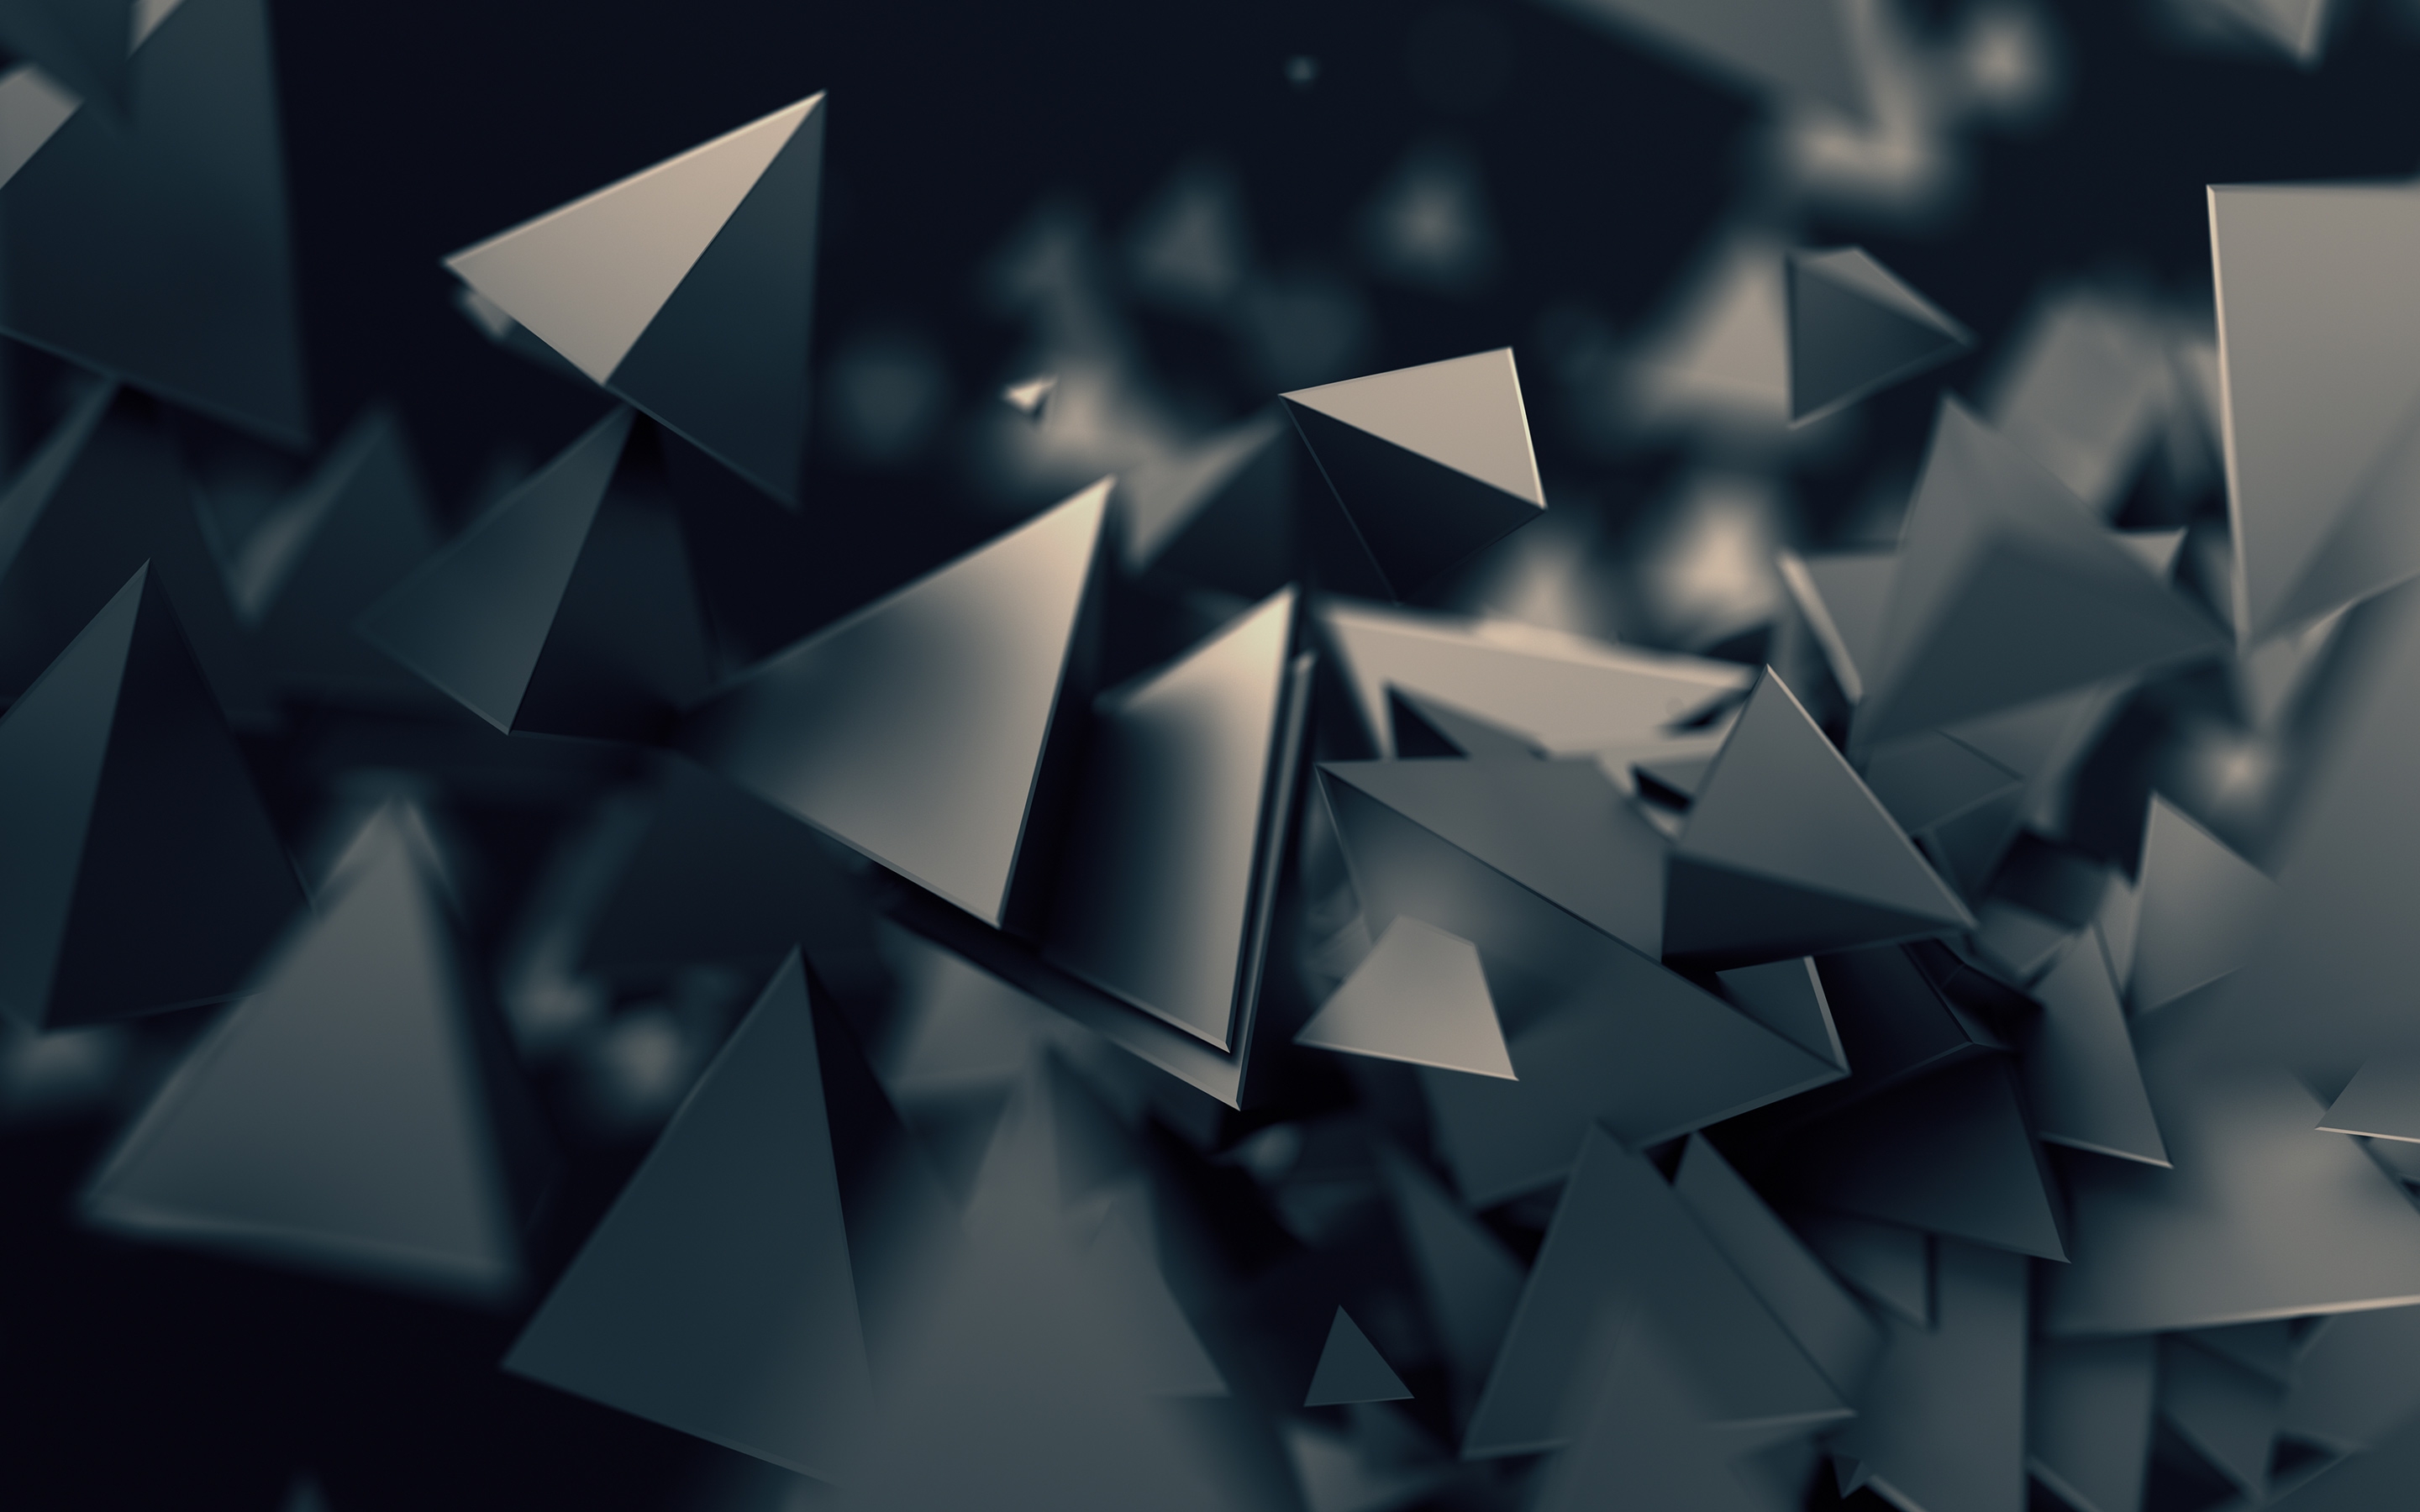 Download 2880x1800 Triangles, Falling Wallpaper for MacBook Pro 15